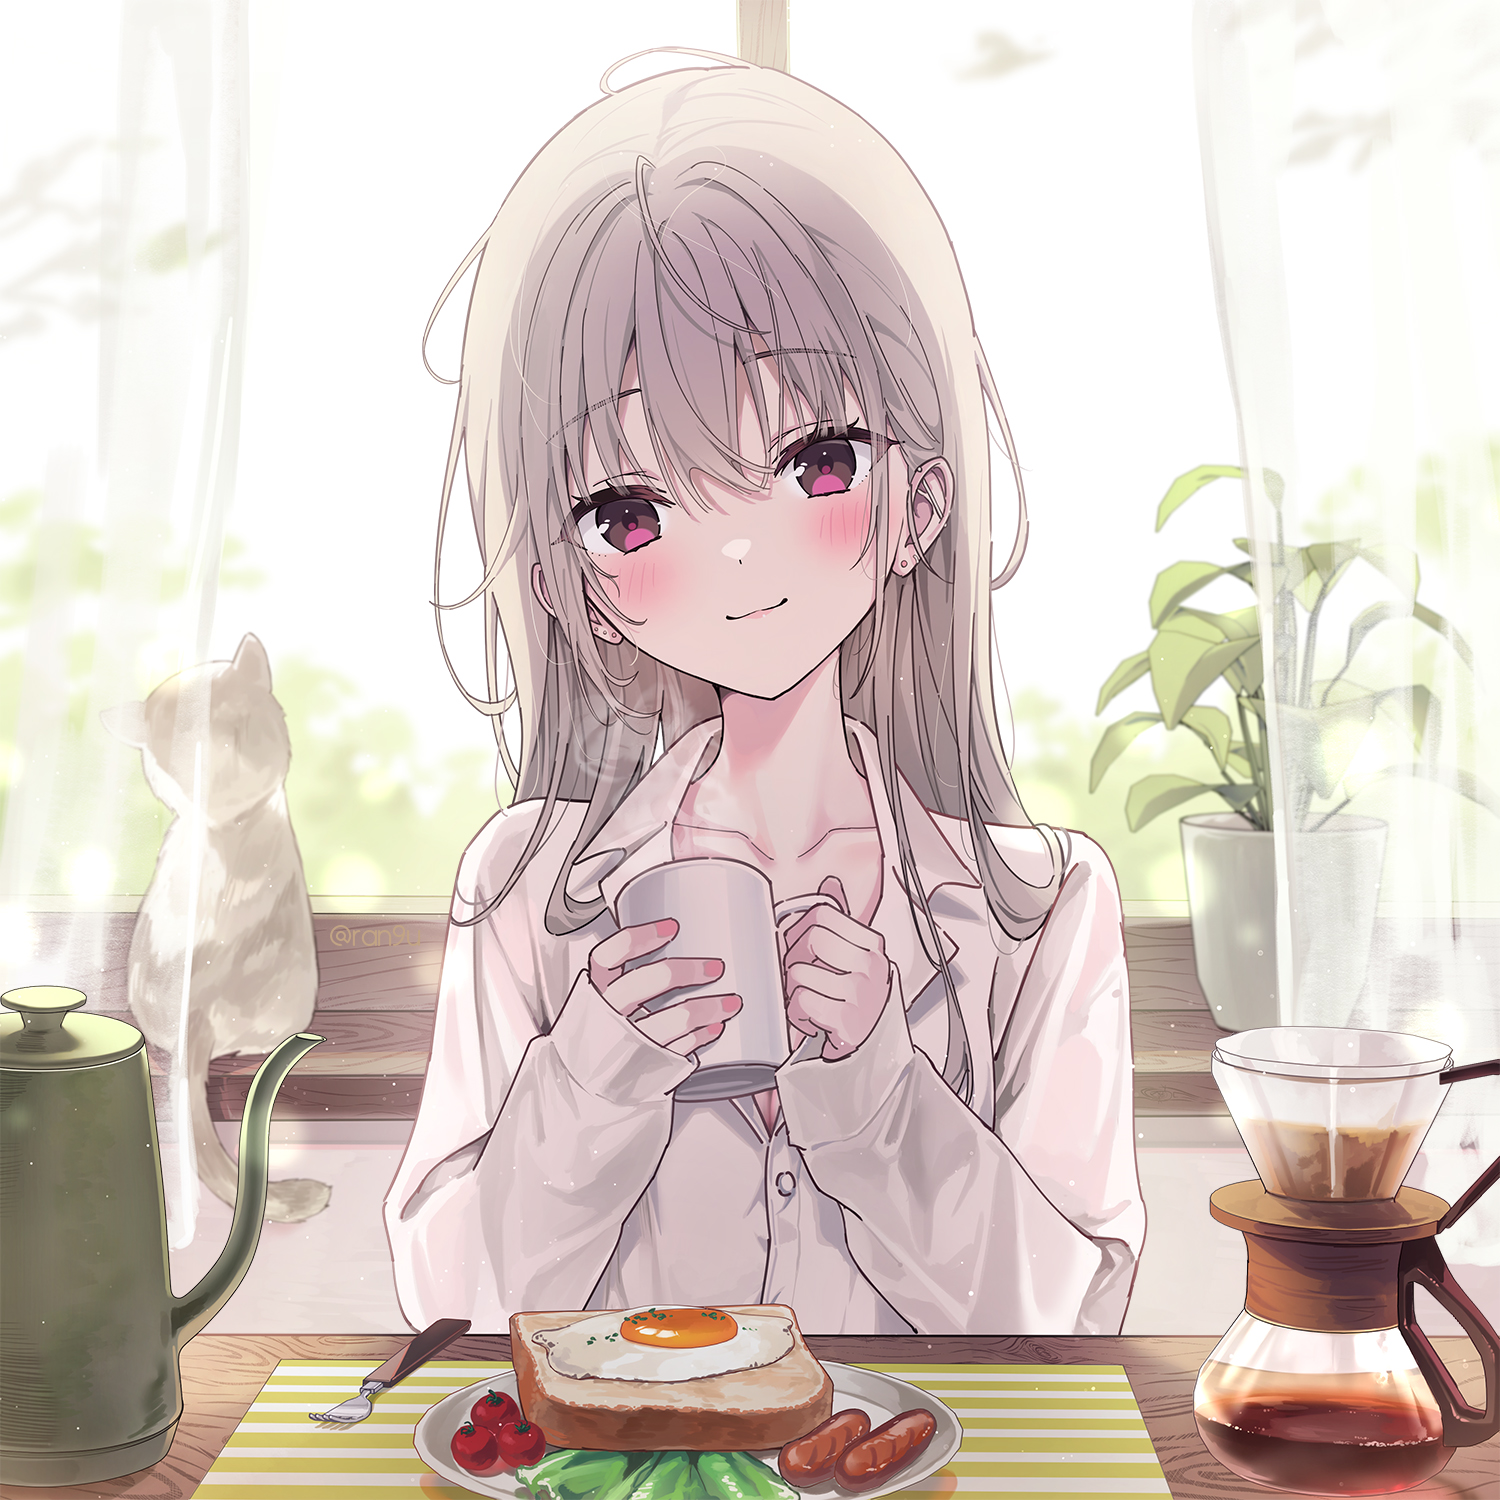 Anime 1500x1500 anime girls pink eyes sitting looking at viewer smiling blushing breakfast food toasts eggs sausage cats animals leaves plants window long hair cup